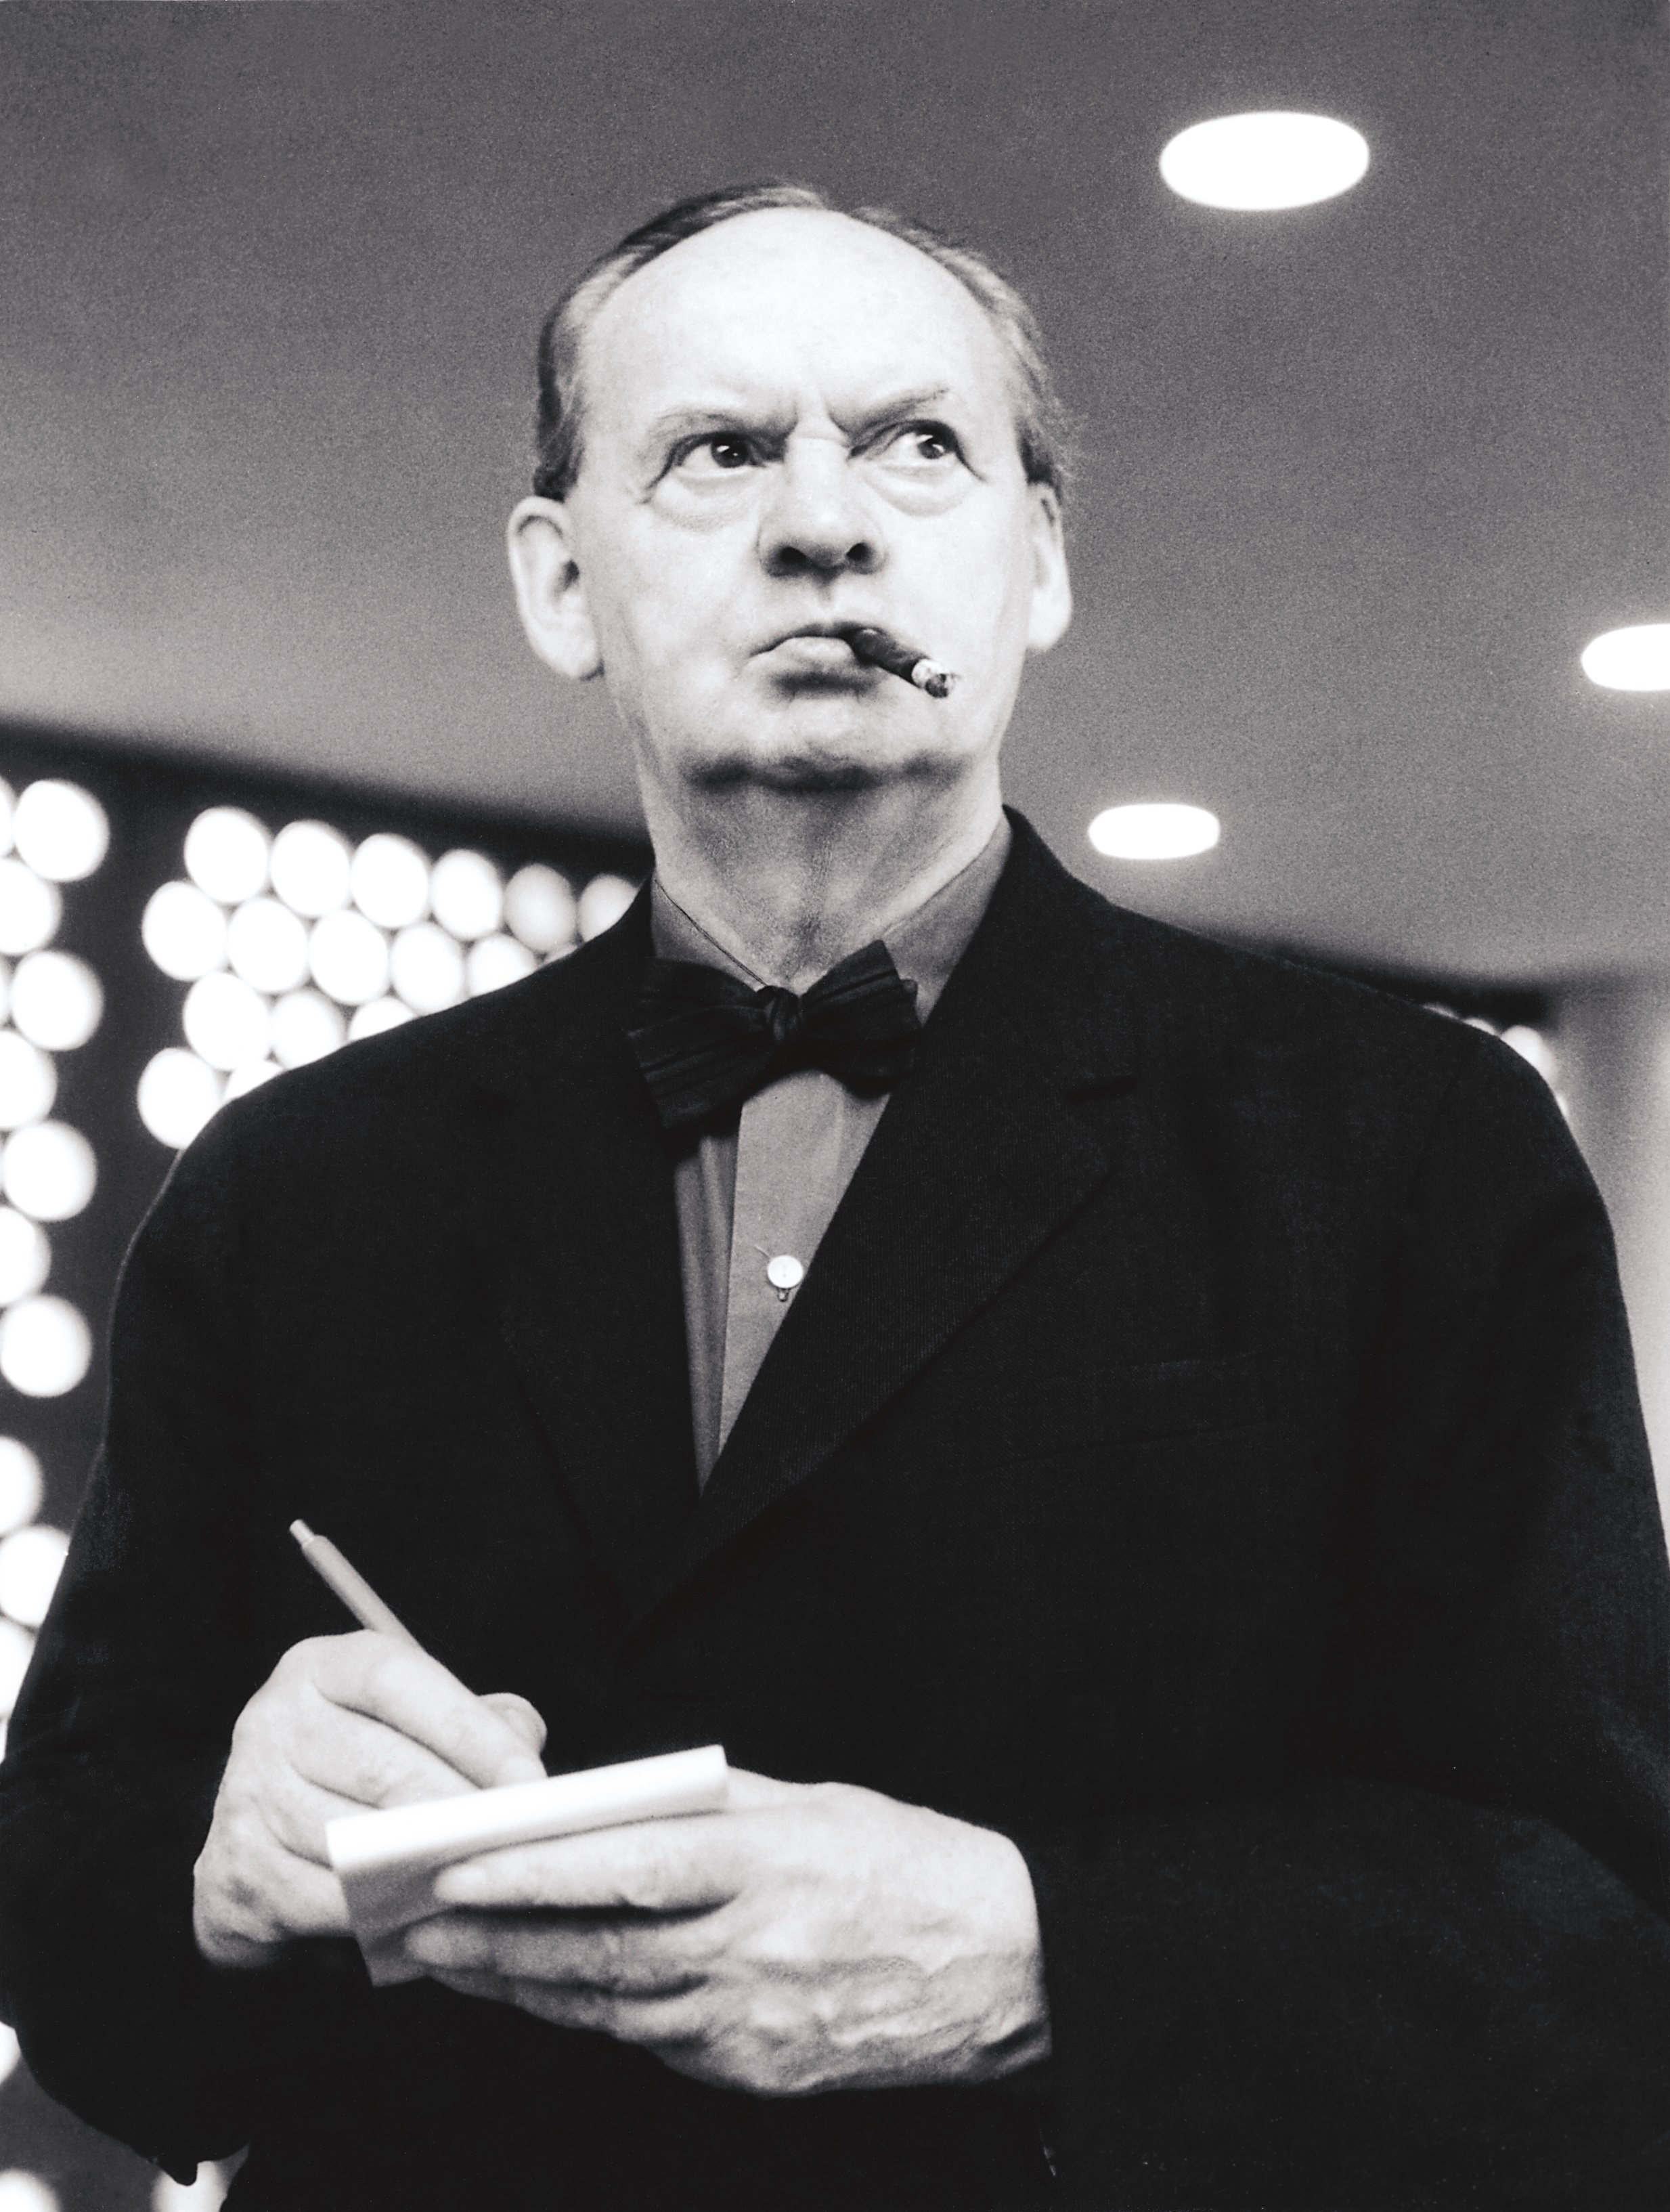 Hans Scharoun with a cigarette in his mouth and a note pad and pencil in his hands.